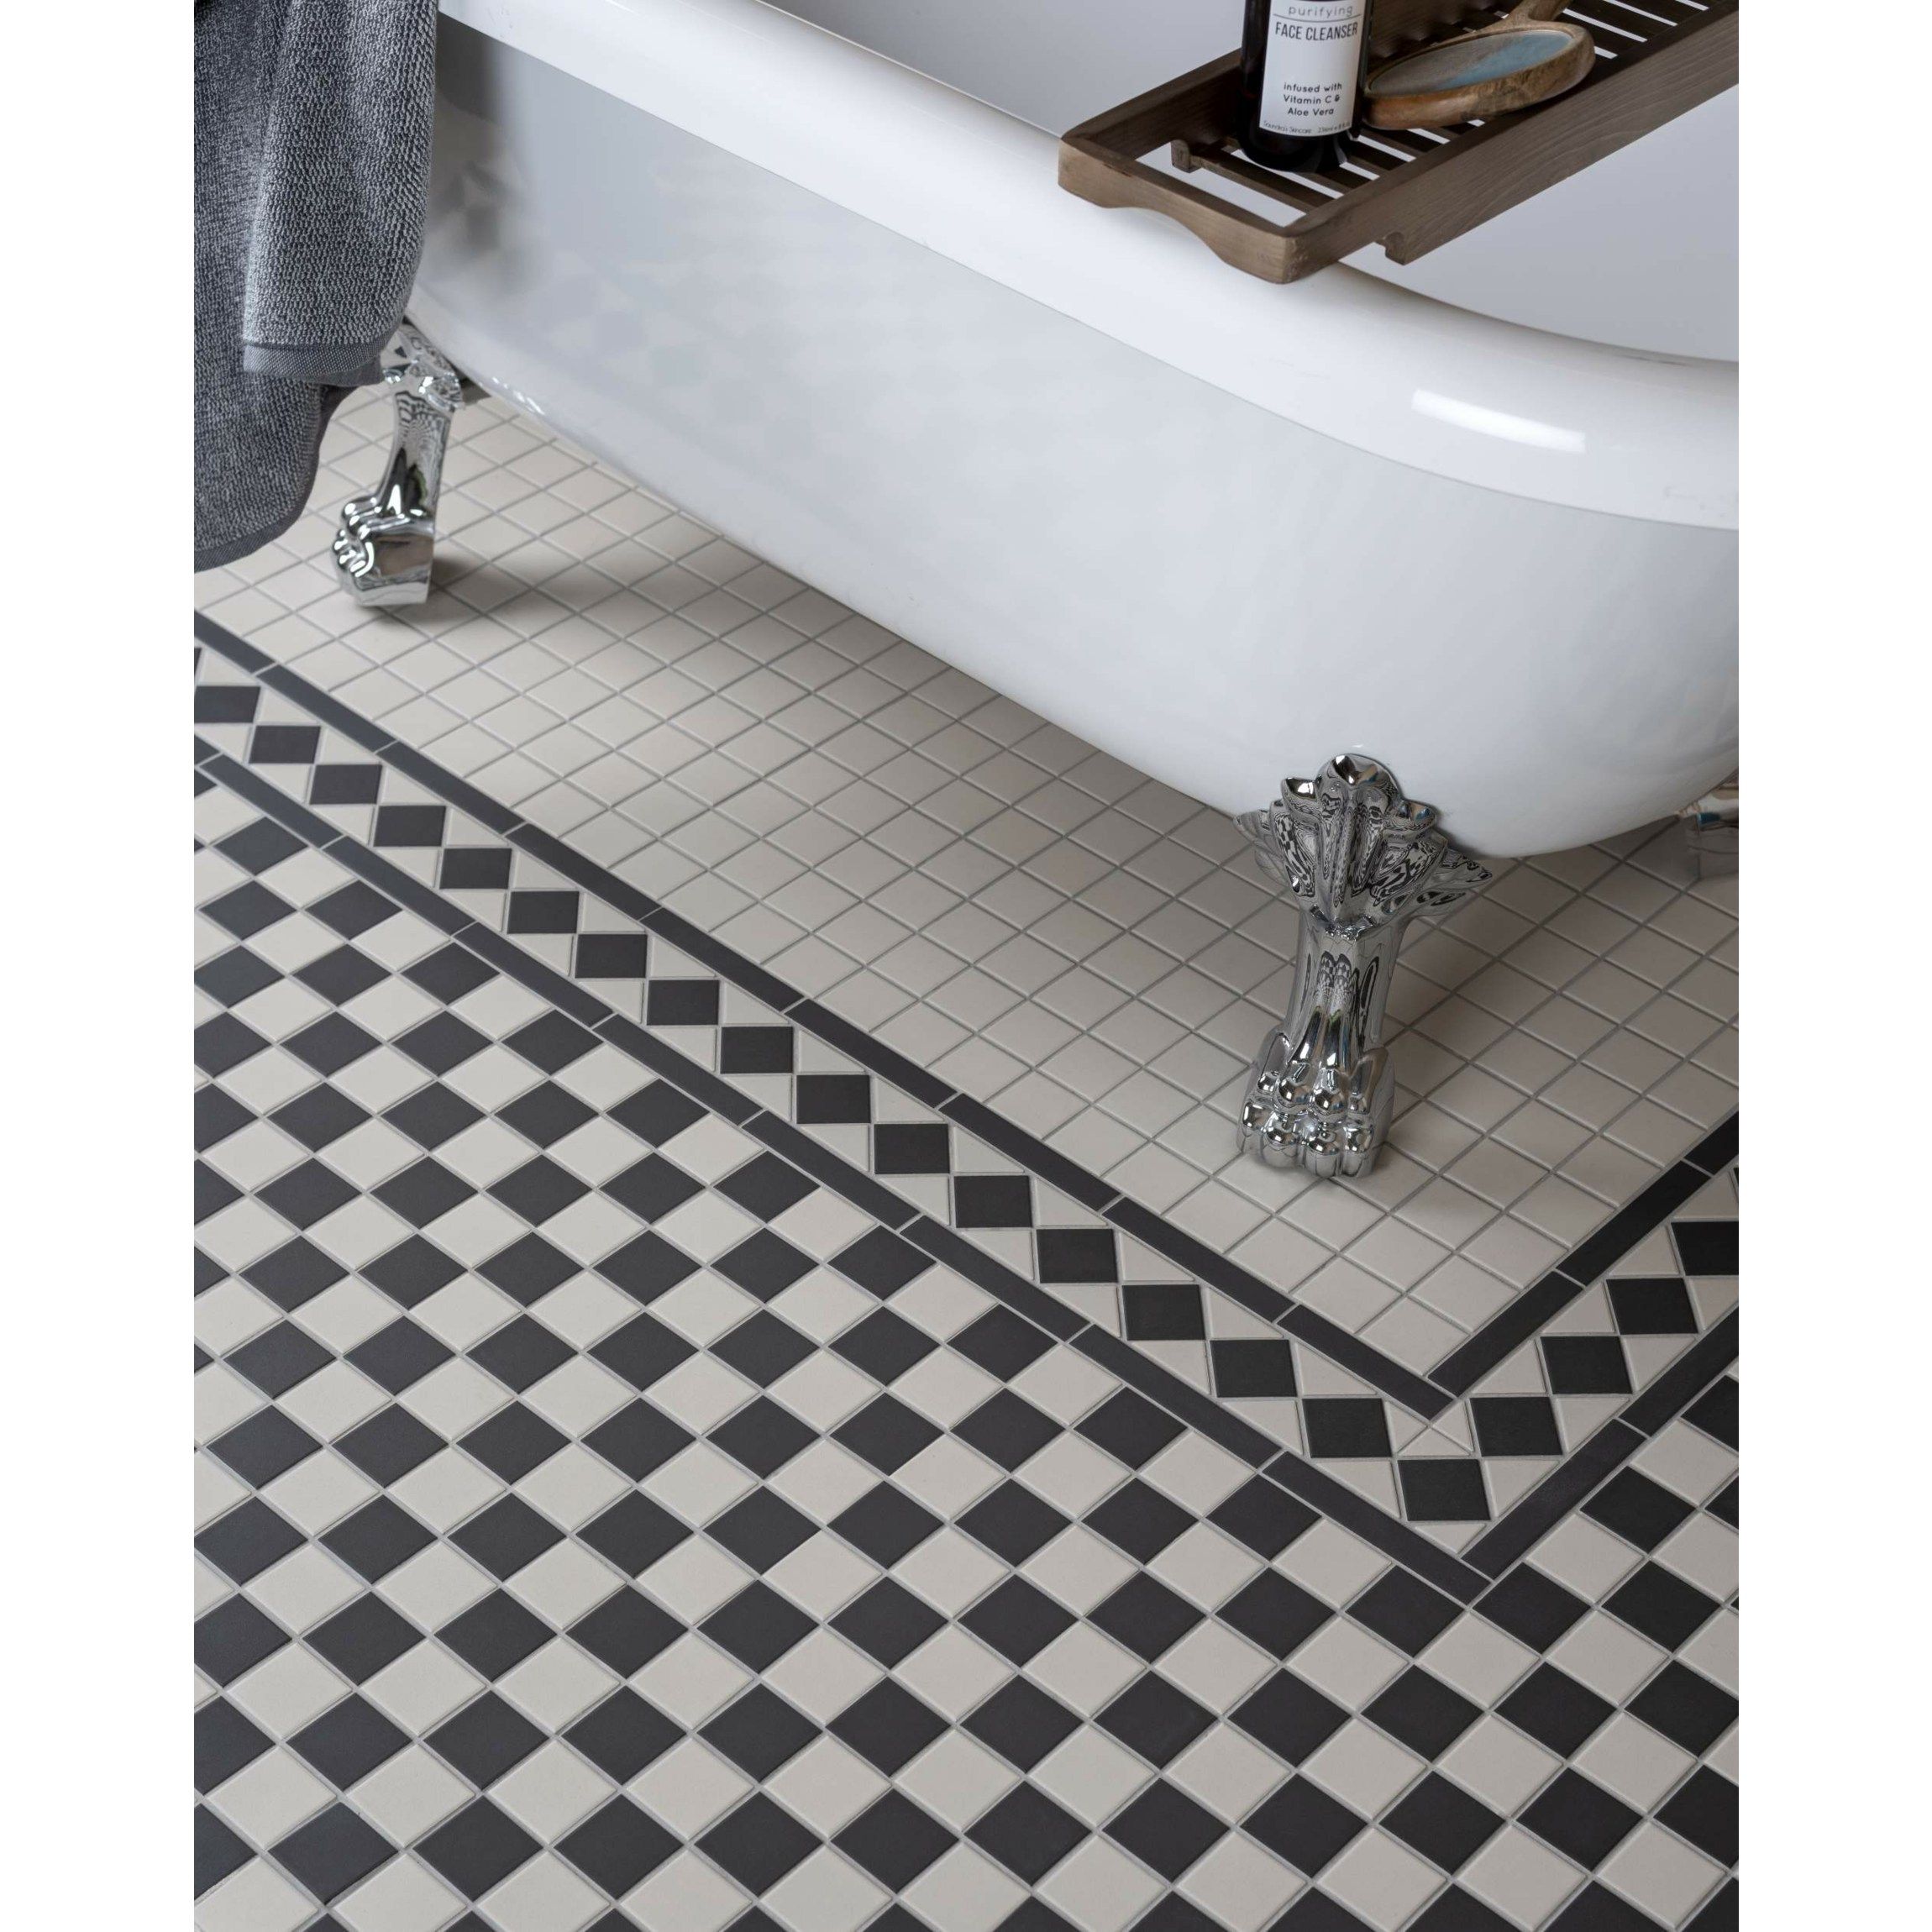 Mosaic Tiles From Tile Mountain, Black And White Mosaic Tile